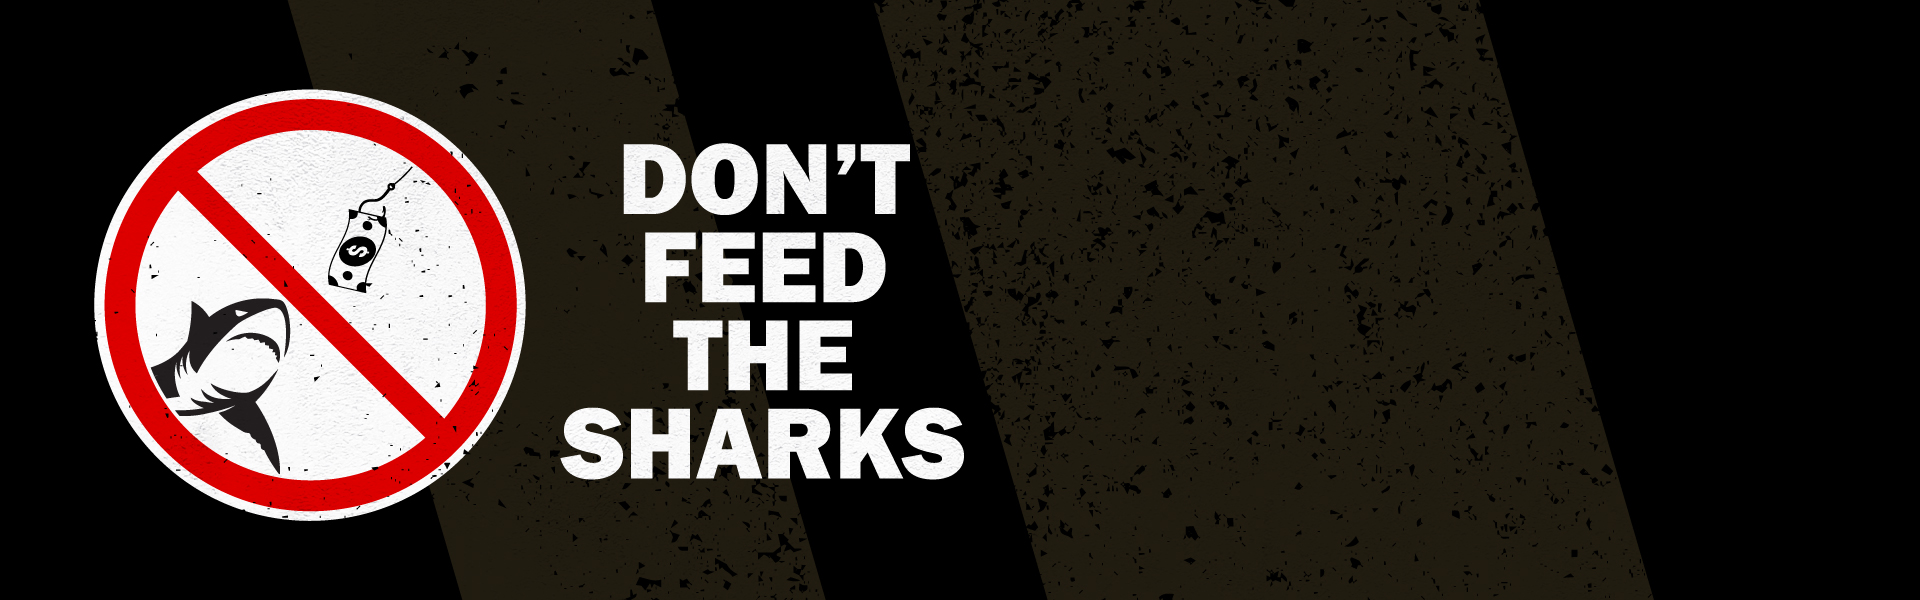 VFW reminds veterans Don't Feed the Claim Sharks